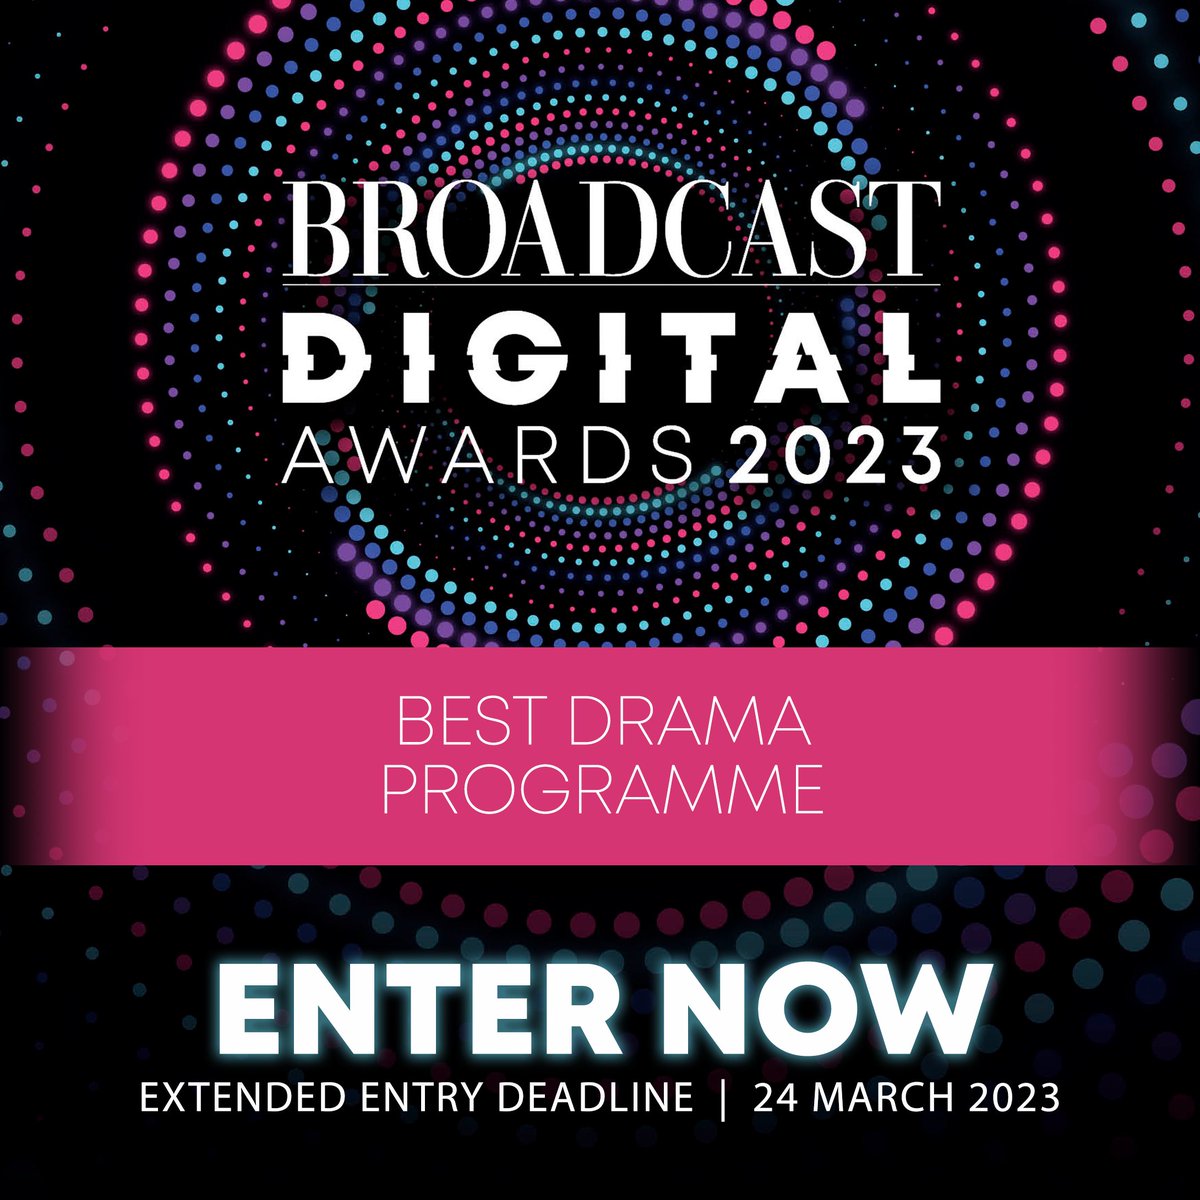 Enter now for the #BroadcastDigitalAward category Best Drama Programme which rewards the best and most creative digitally exclusive #drama programme, including ongoing series, single dramas, or mini-series.

Enter now at: bit.ly/BDA2023Enter
#BDA2023